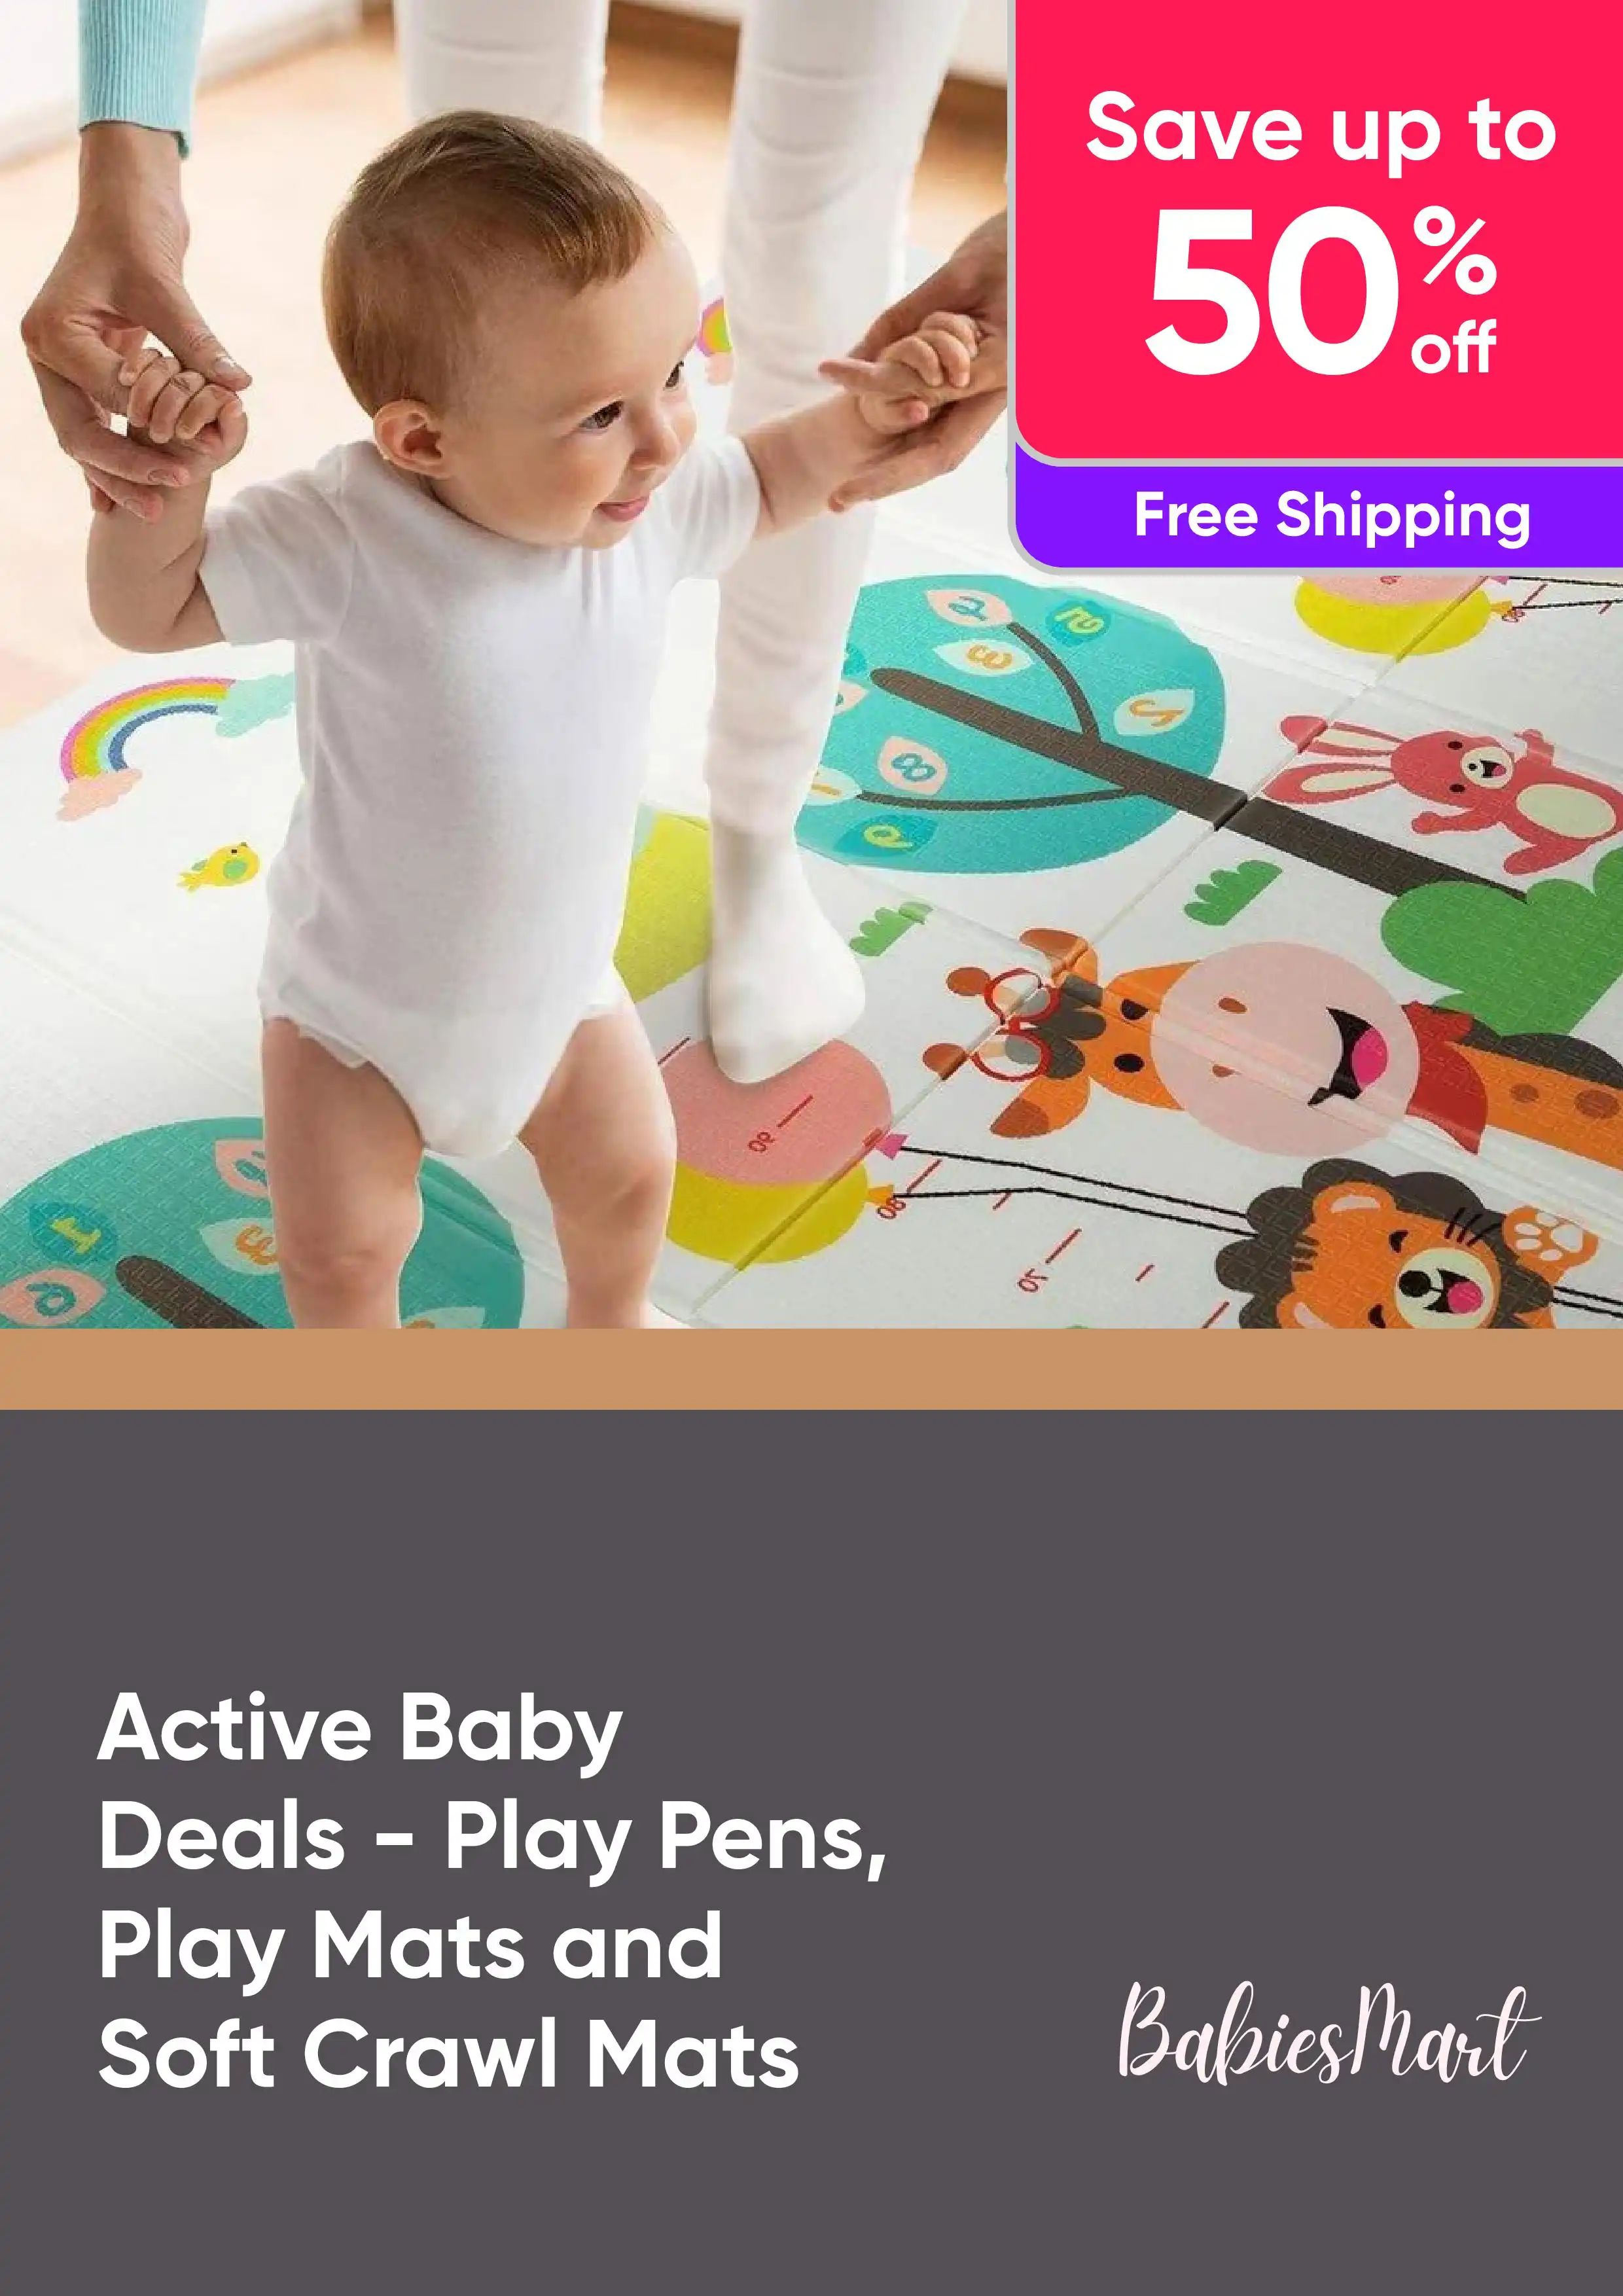 Active Baby Deals - Up to 50% Off Play Pens, Play Mats and Soft Crawl Mats